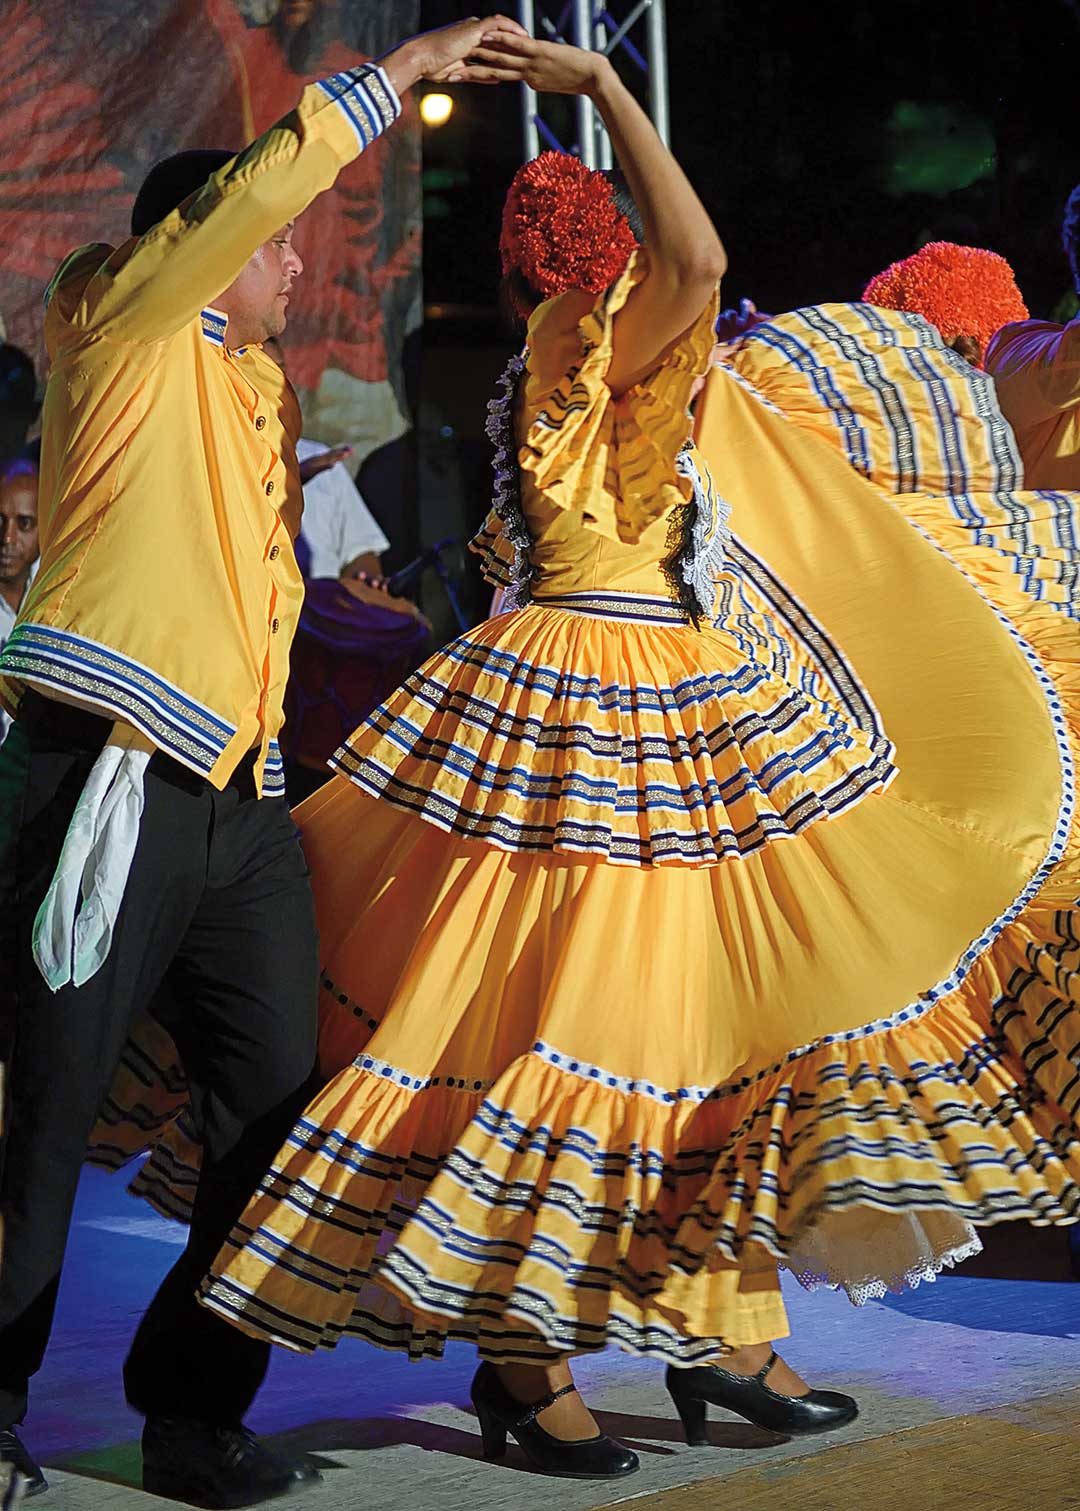 which of these dances originated in the caribbean